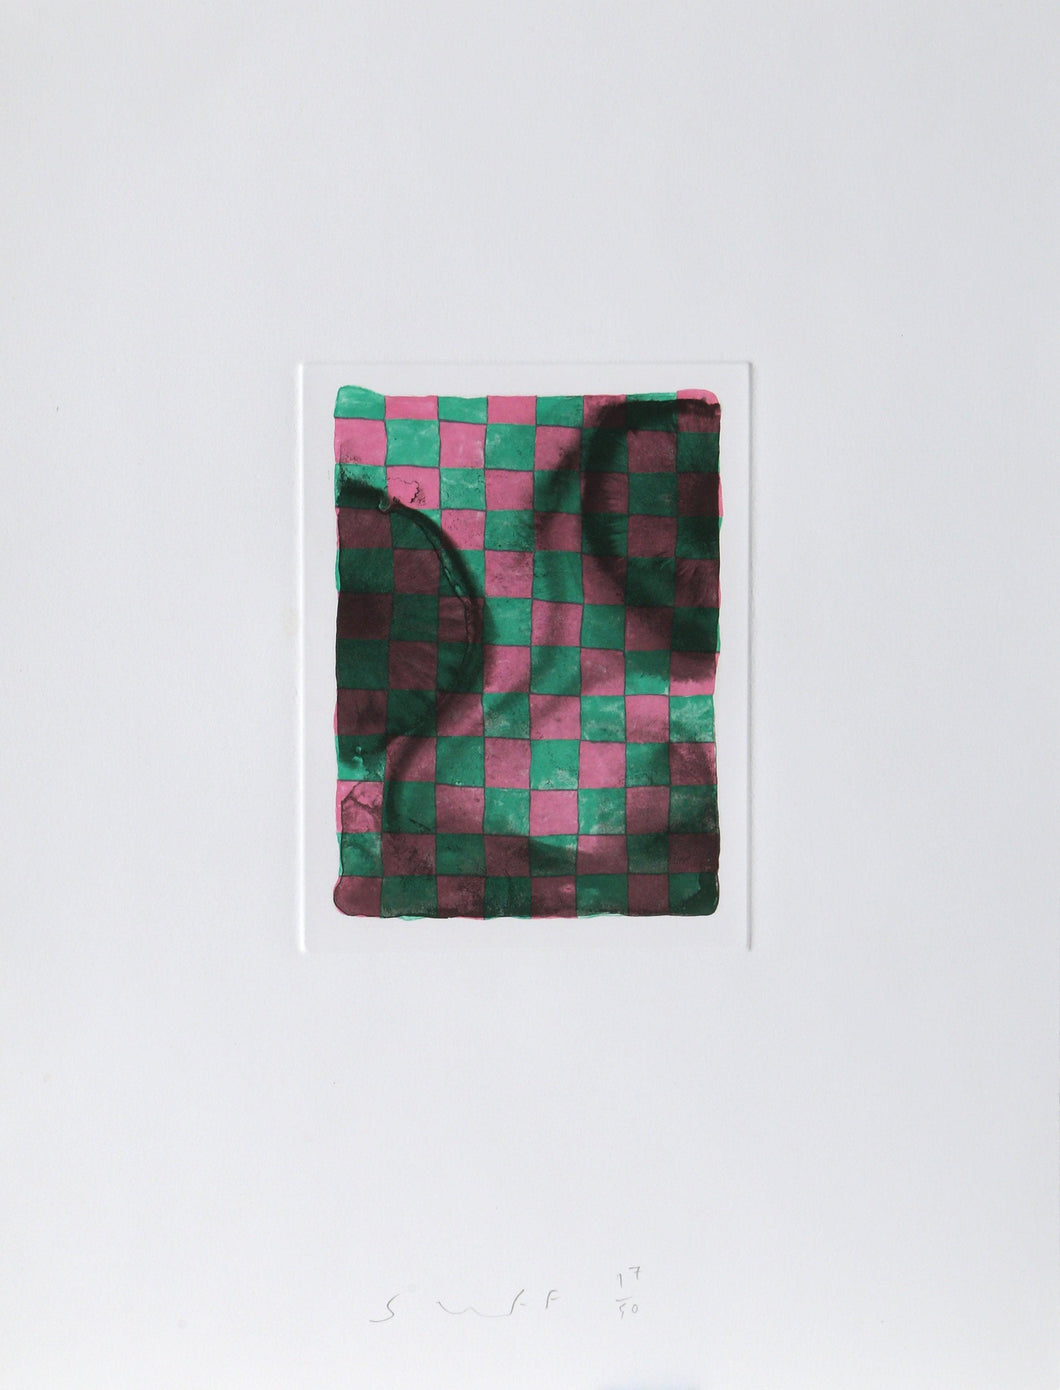 Untitled - Green Pink Checkerboard Etching | Peter Schuyff,{{product.type}}